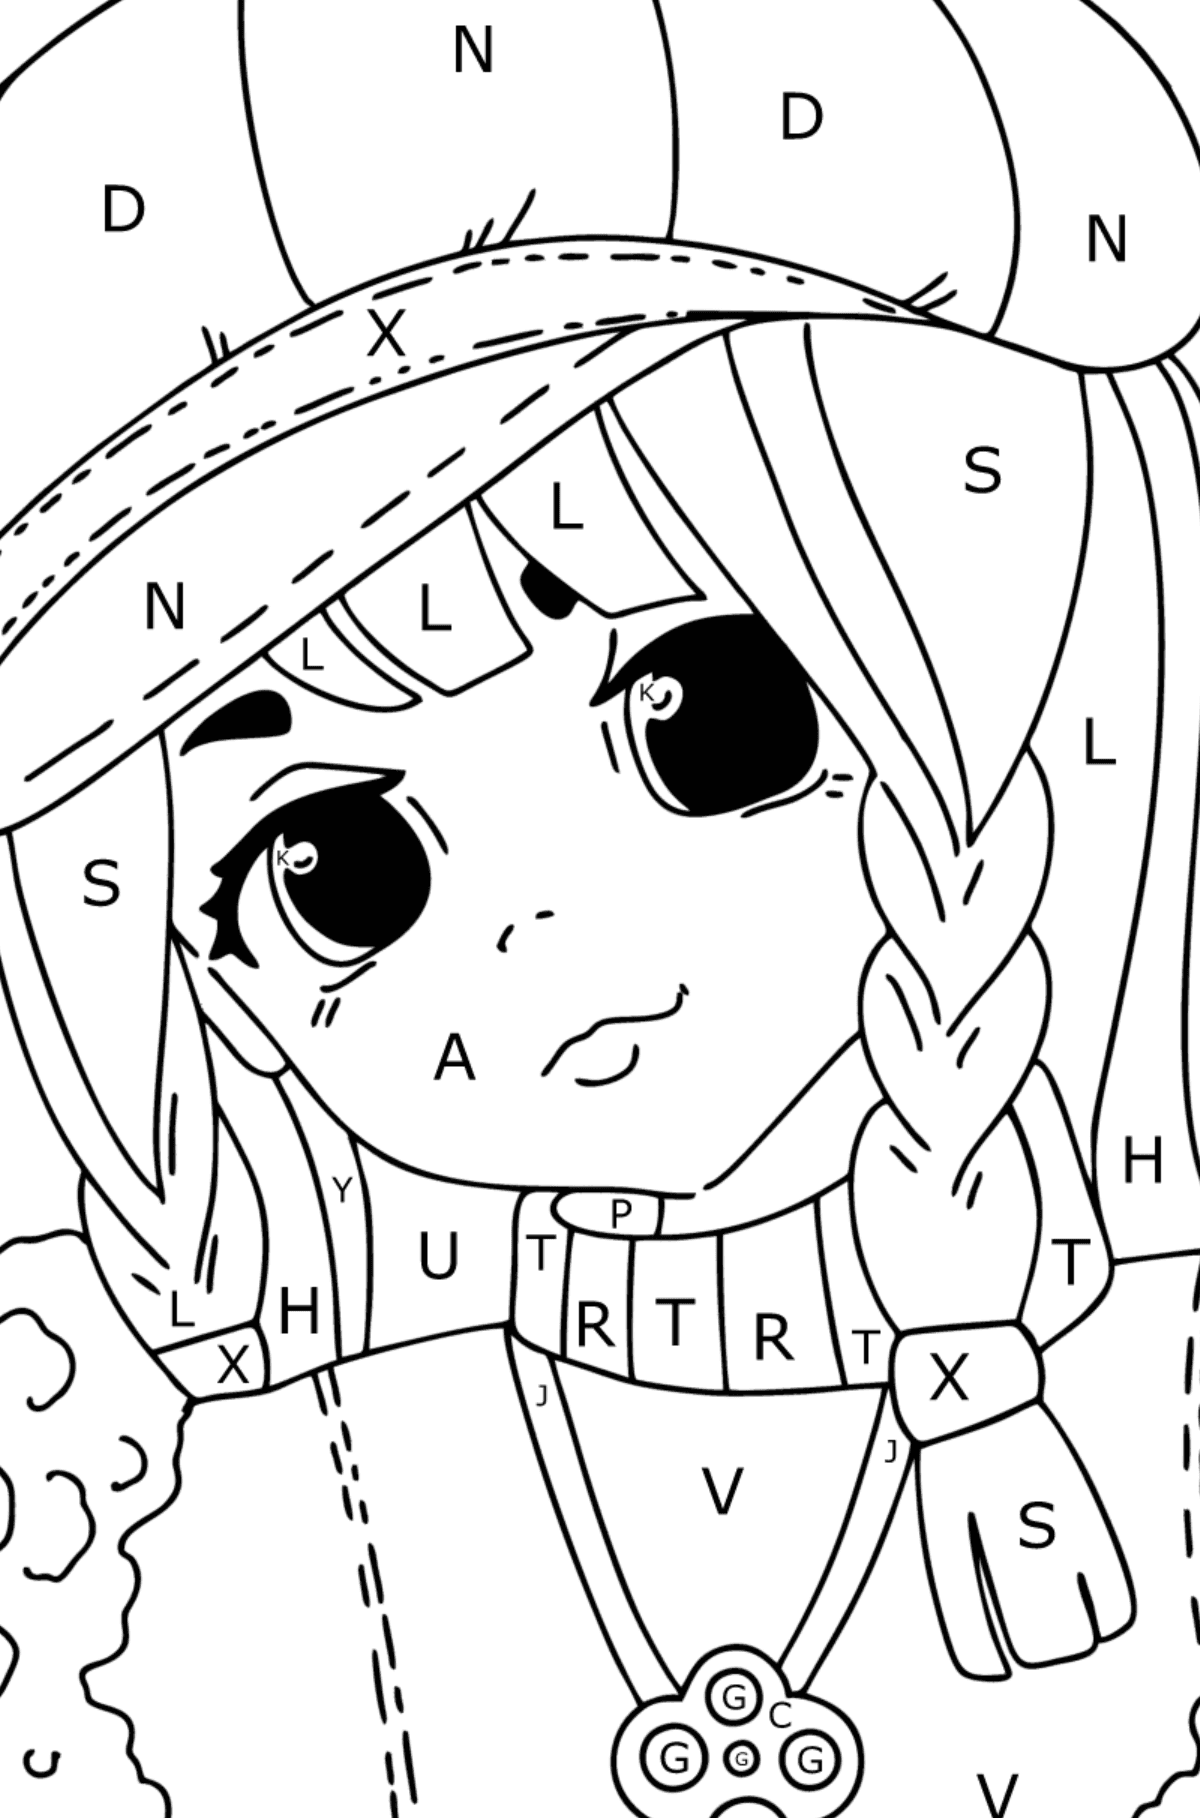 Portrait of a teen girl coloring page - Coloring by Letters for Kids